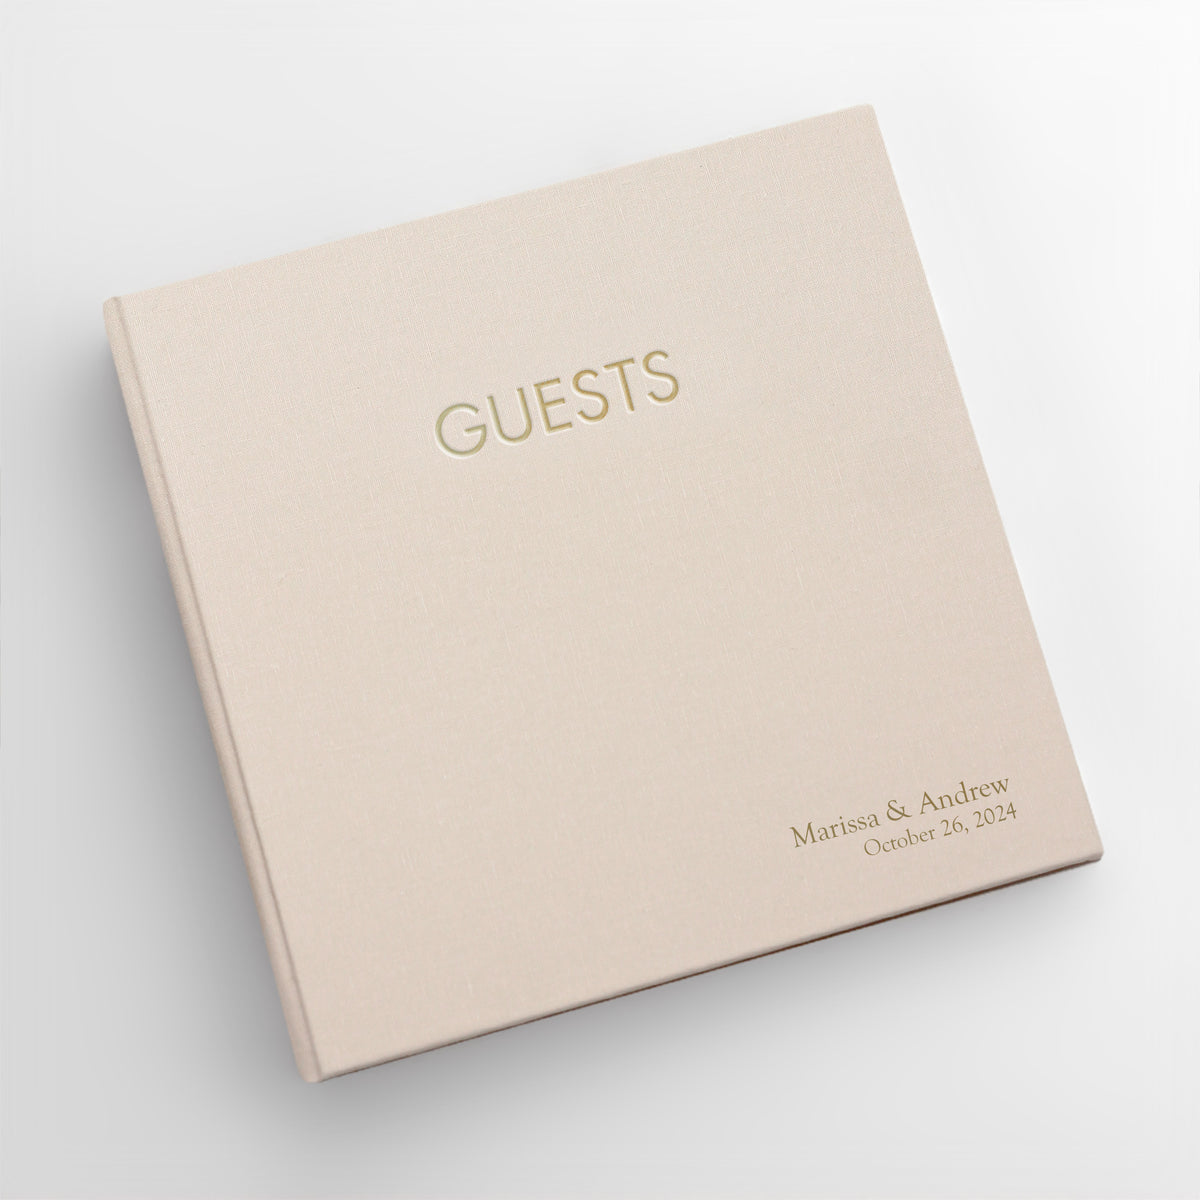 Event Guestbook Embossed with “Guests” with Ballet Pink Cotton Cover